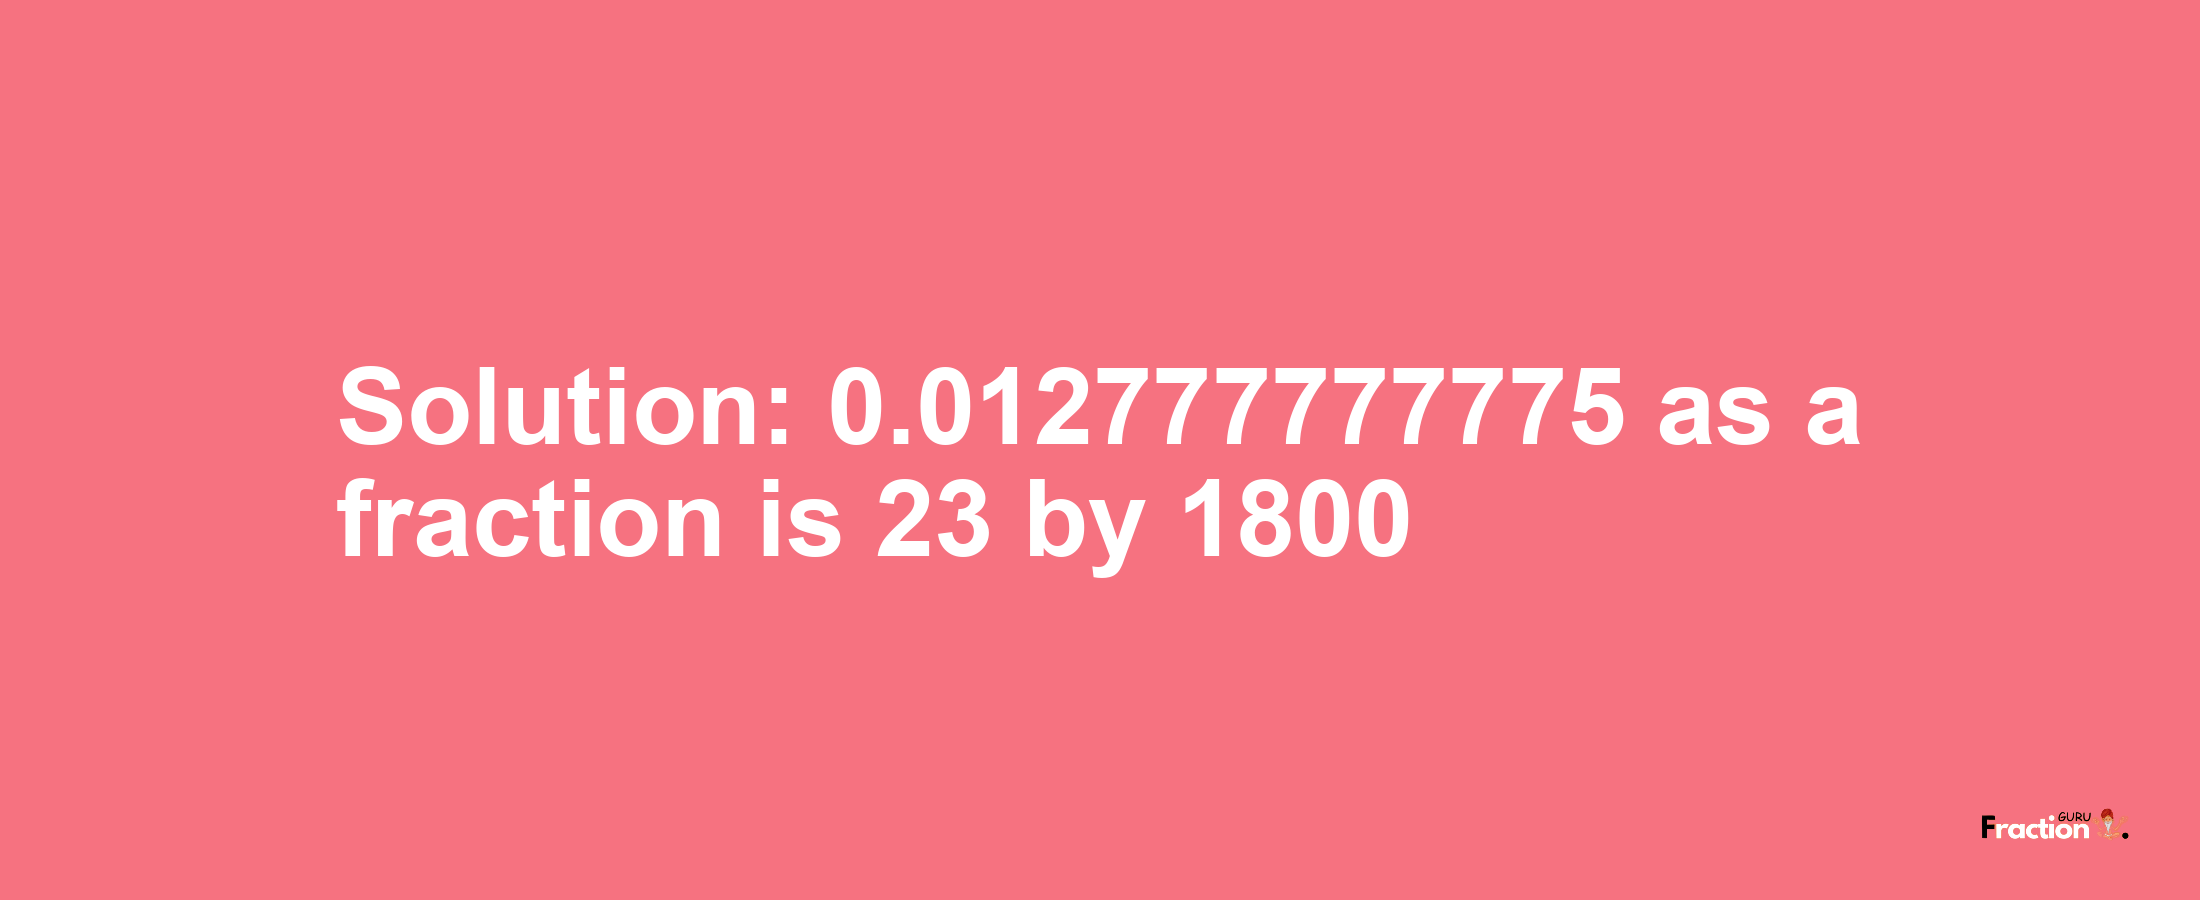 Solution:0.012777777775 as a fraction is 23/1800